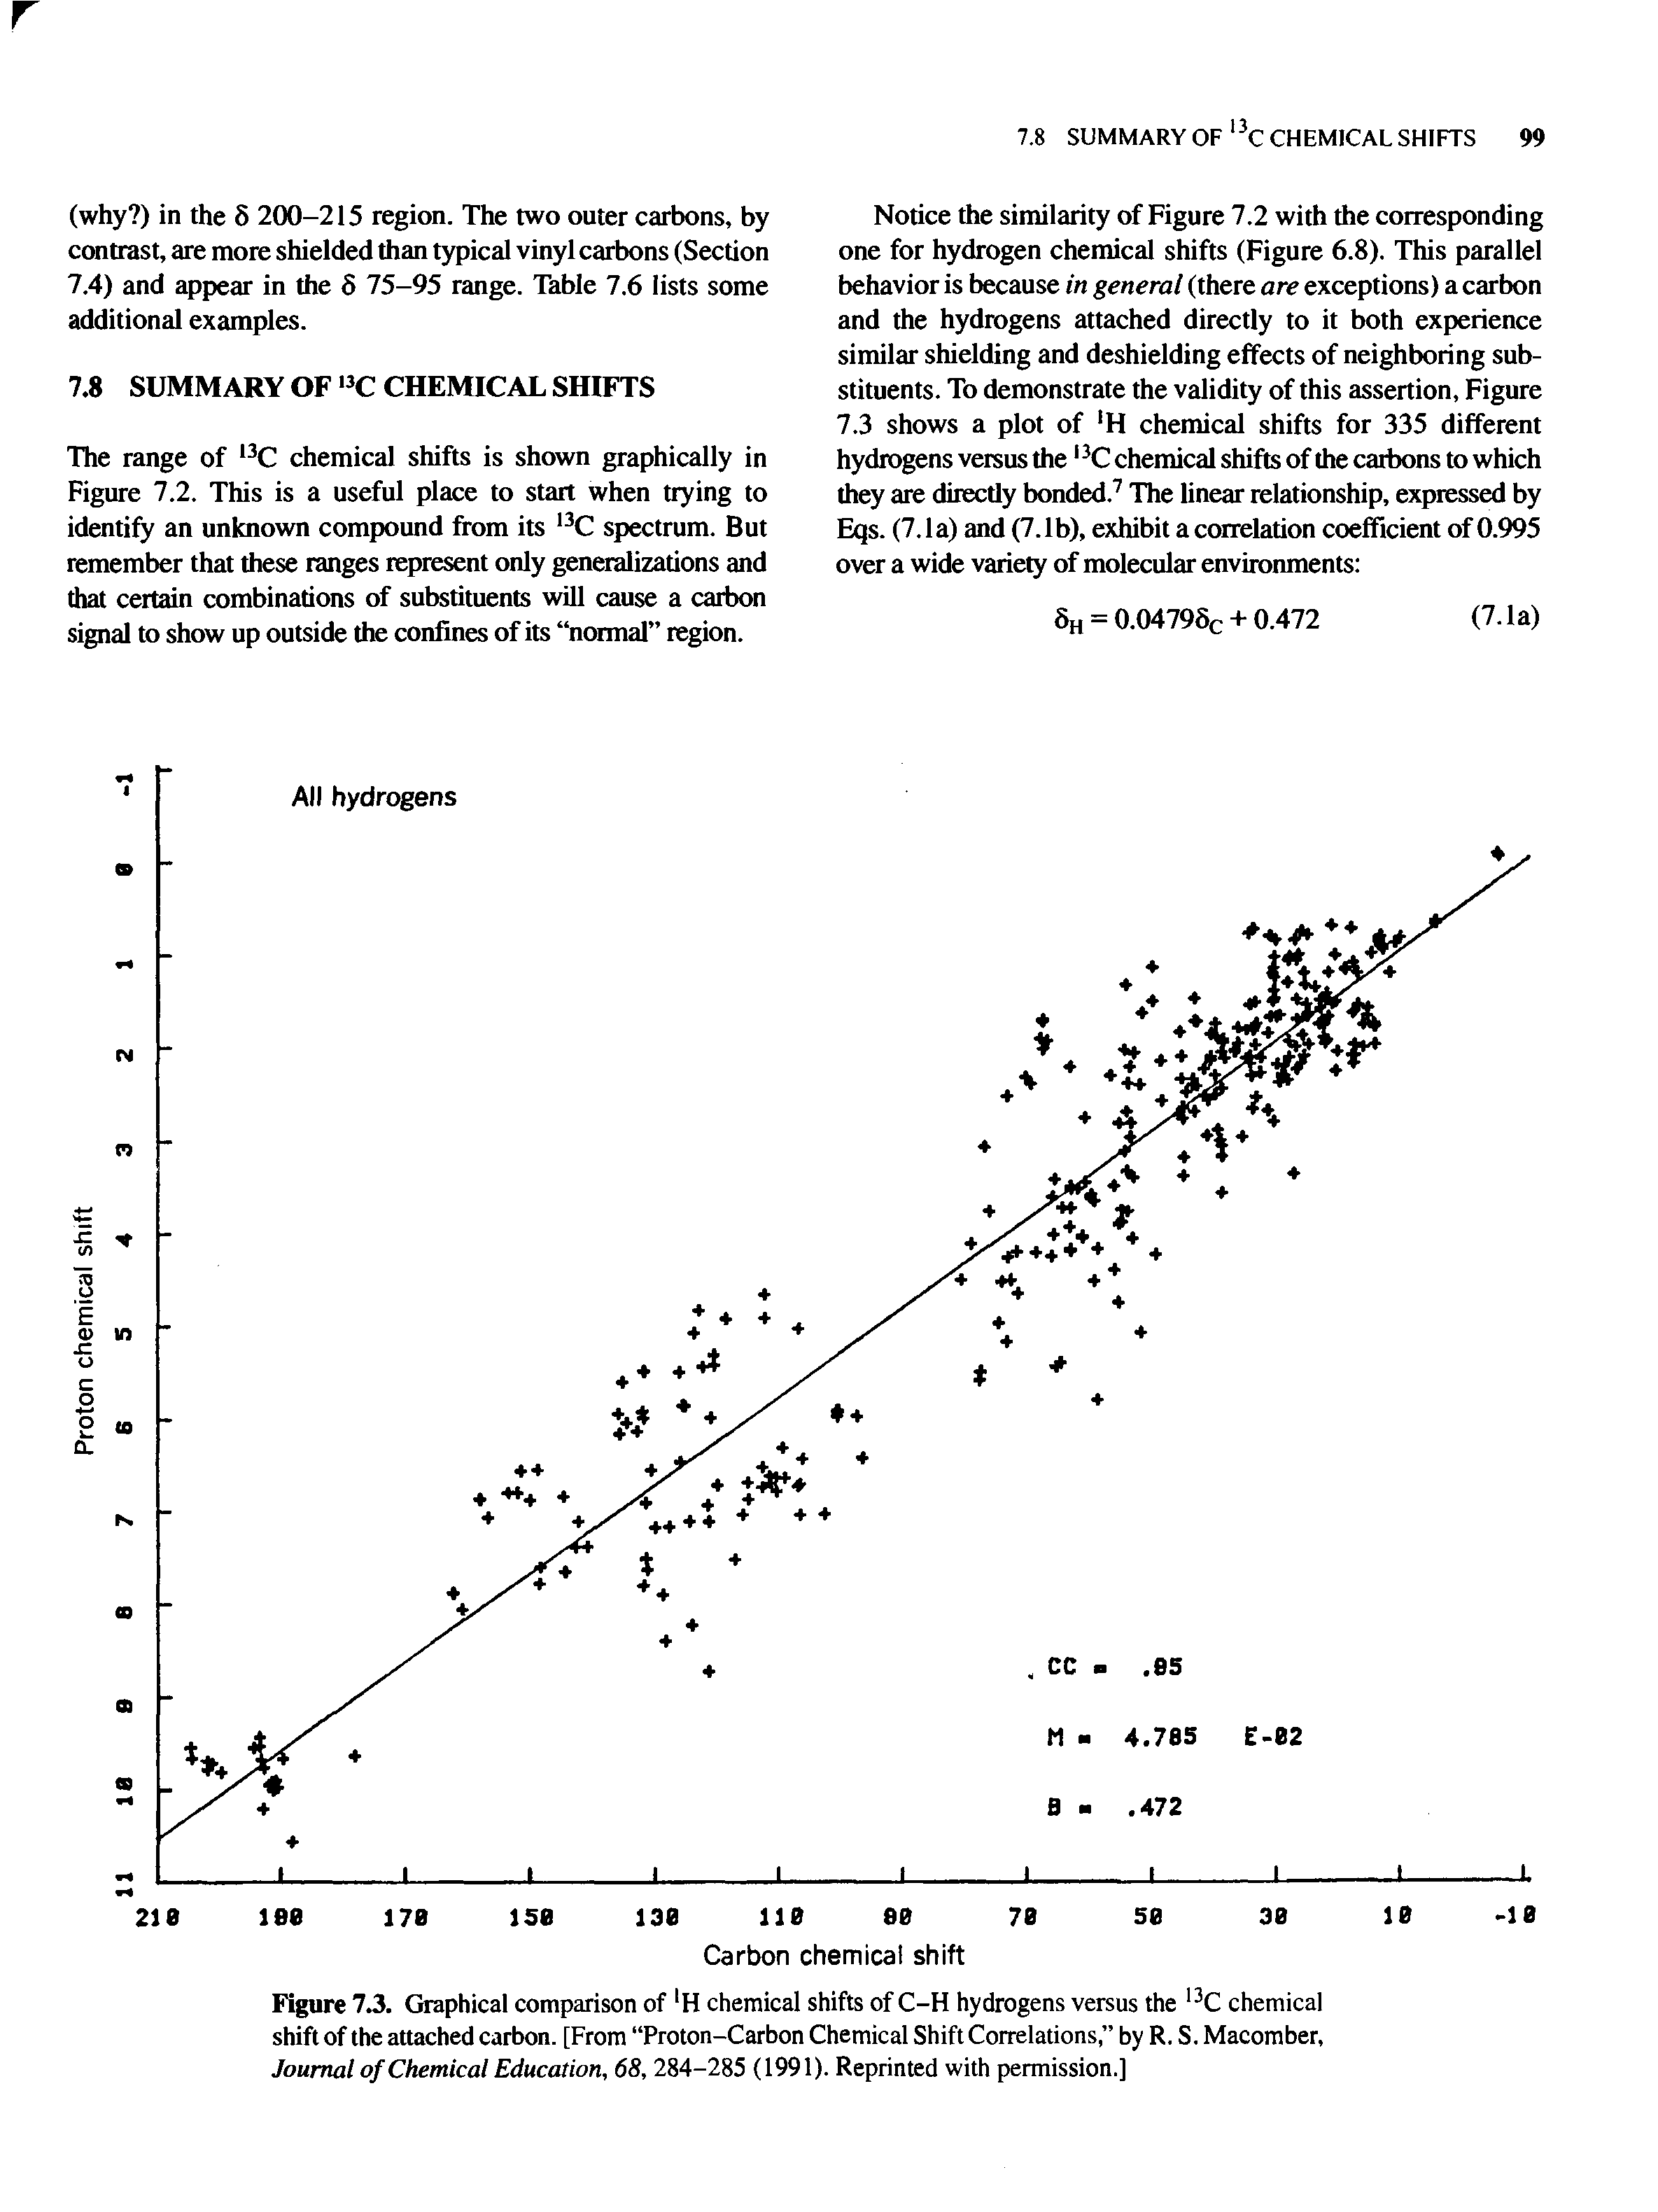 Figure 7.3. Graphical comparison of H chemical shifts of C-H hydrogens versus the l3C chemical shift of the attached carbon. [From Proton-Carbon Chemical Shift Correlations, by R. S. Macomber, Journal of Chemical Education, 68, 284-285 (1991). Reprinted with permission.]...